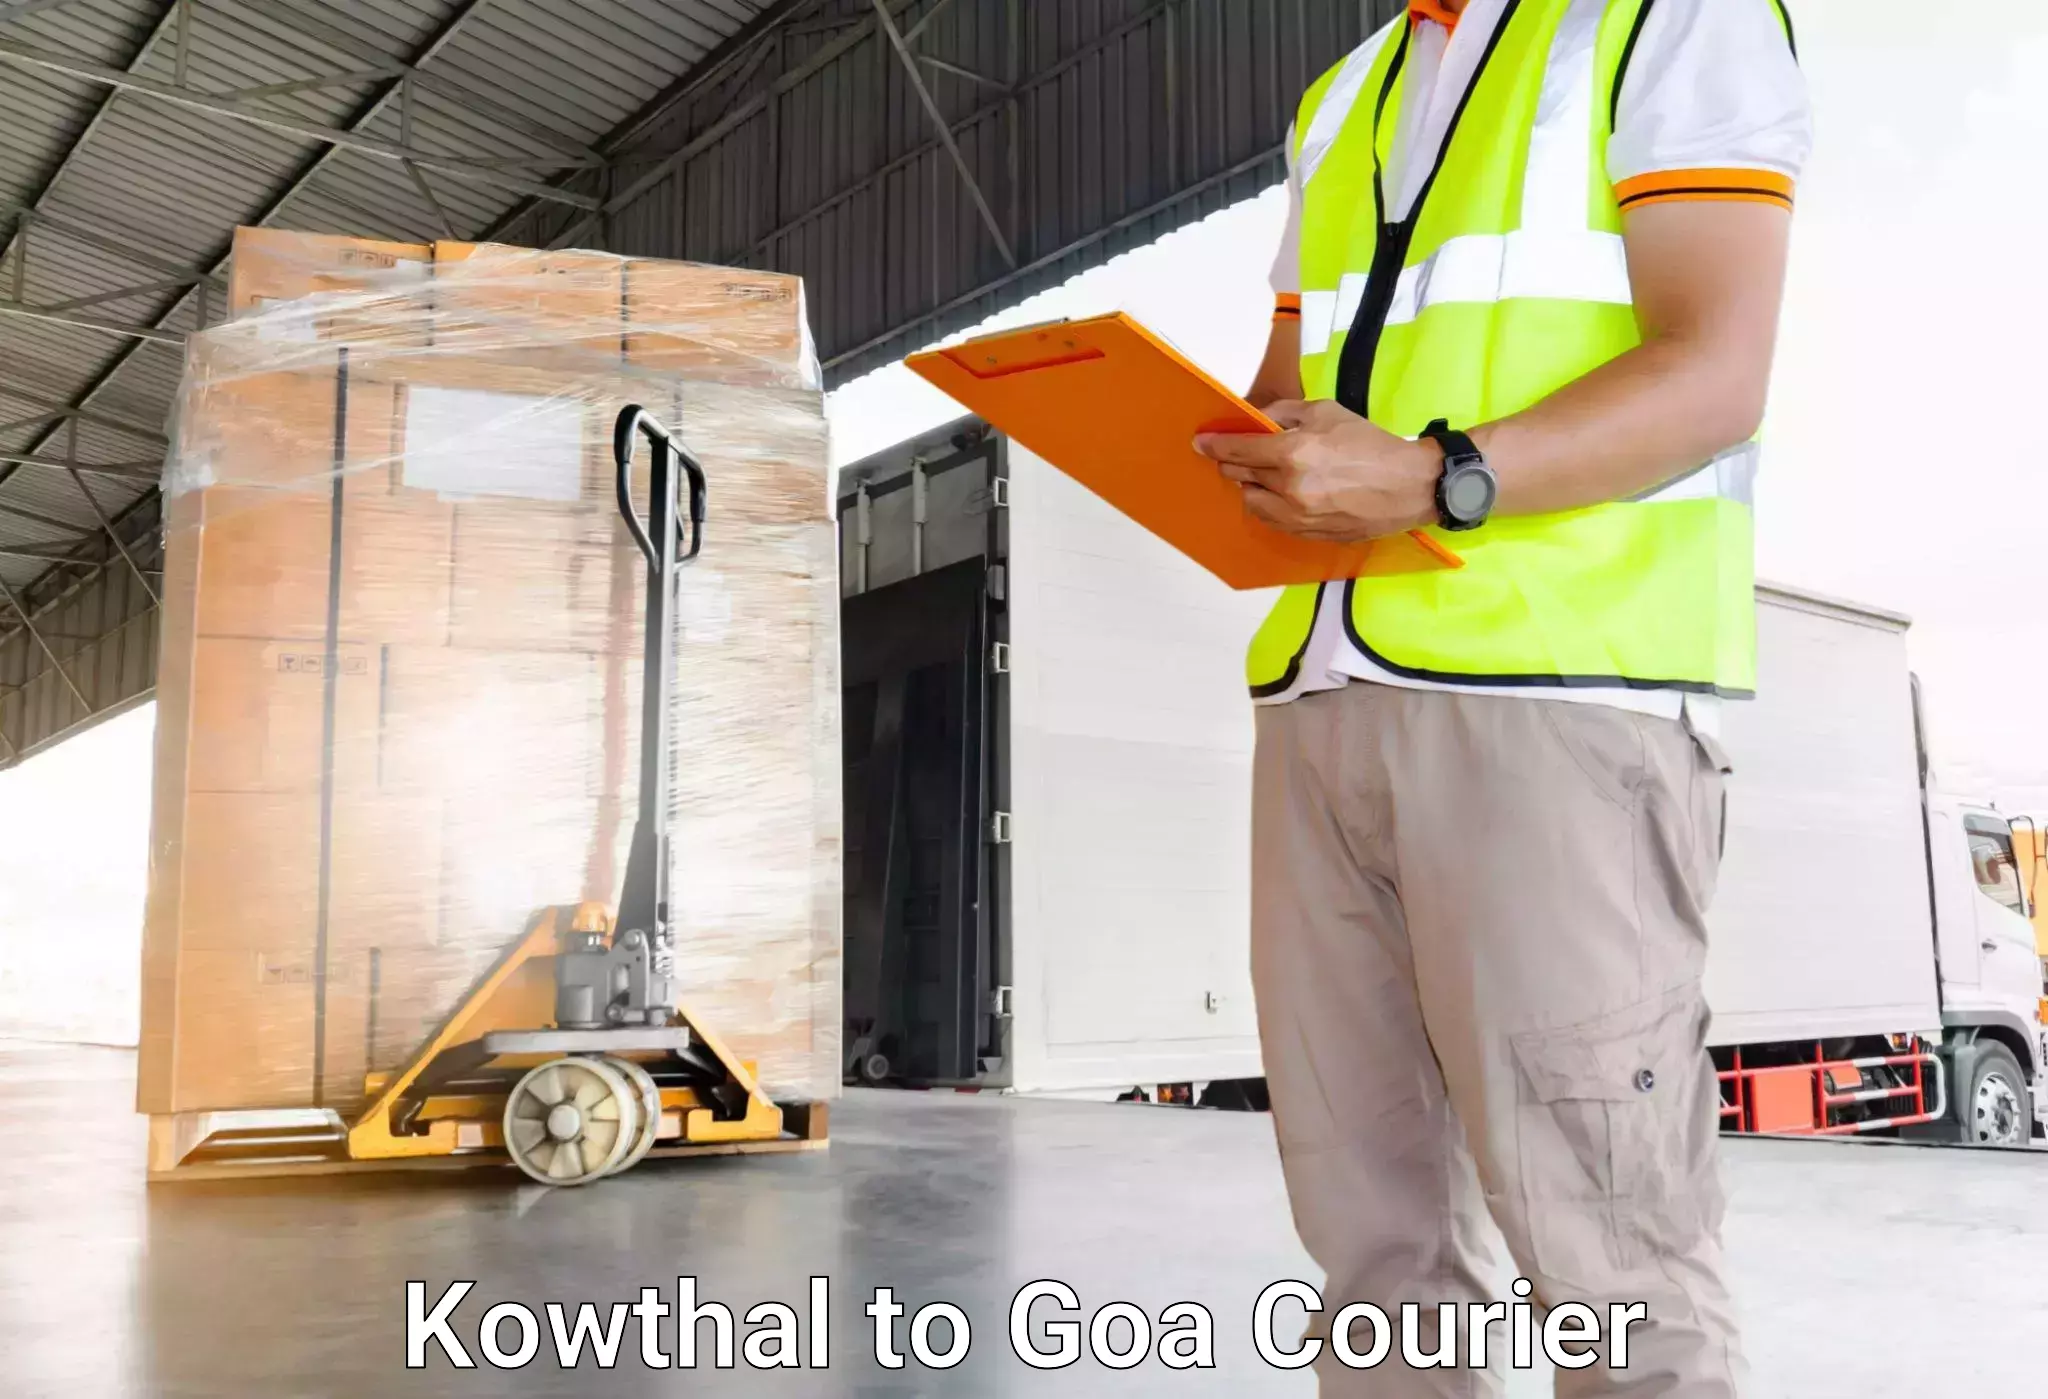 Online luggage shipping booking Kowthal to Goa